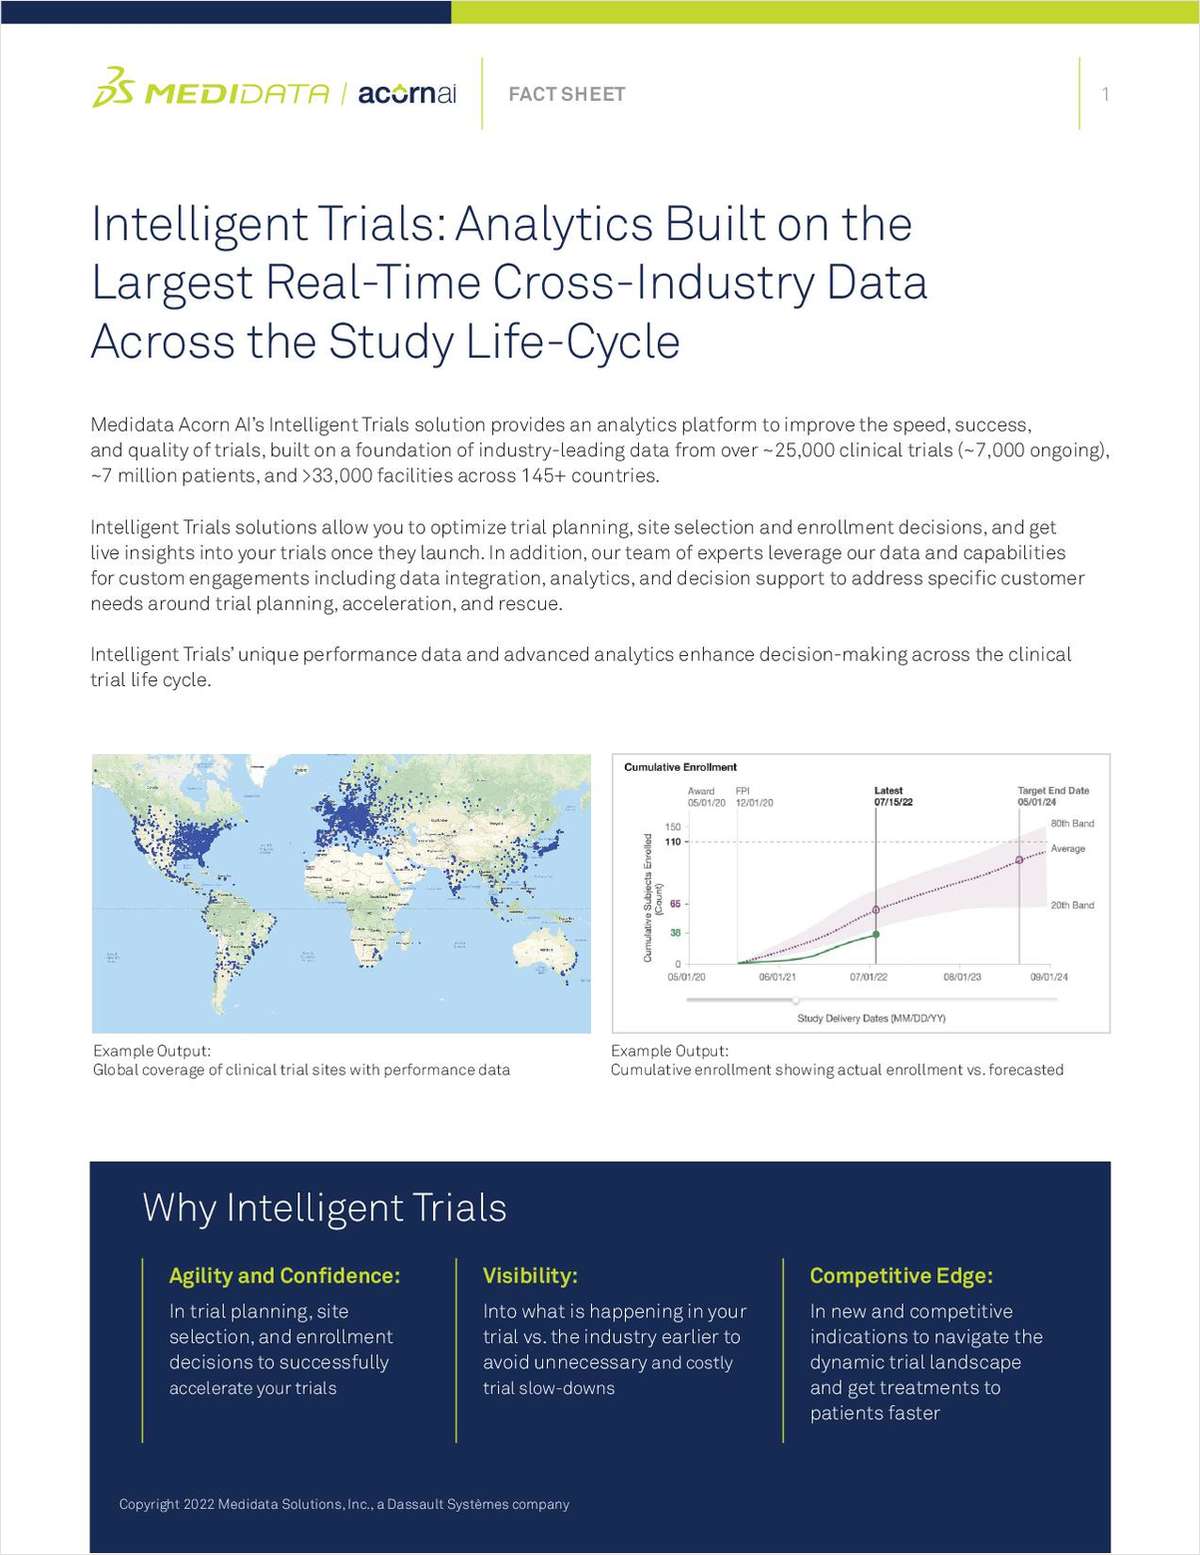 Intelligent Trials: Analytics Built on the Largest Real-Time Cross-Industry Data Across the Study Life-Cycle